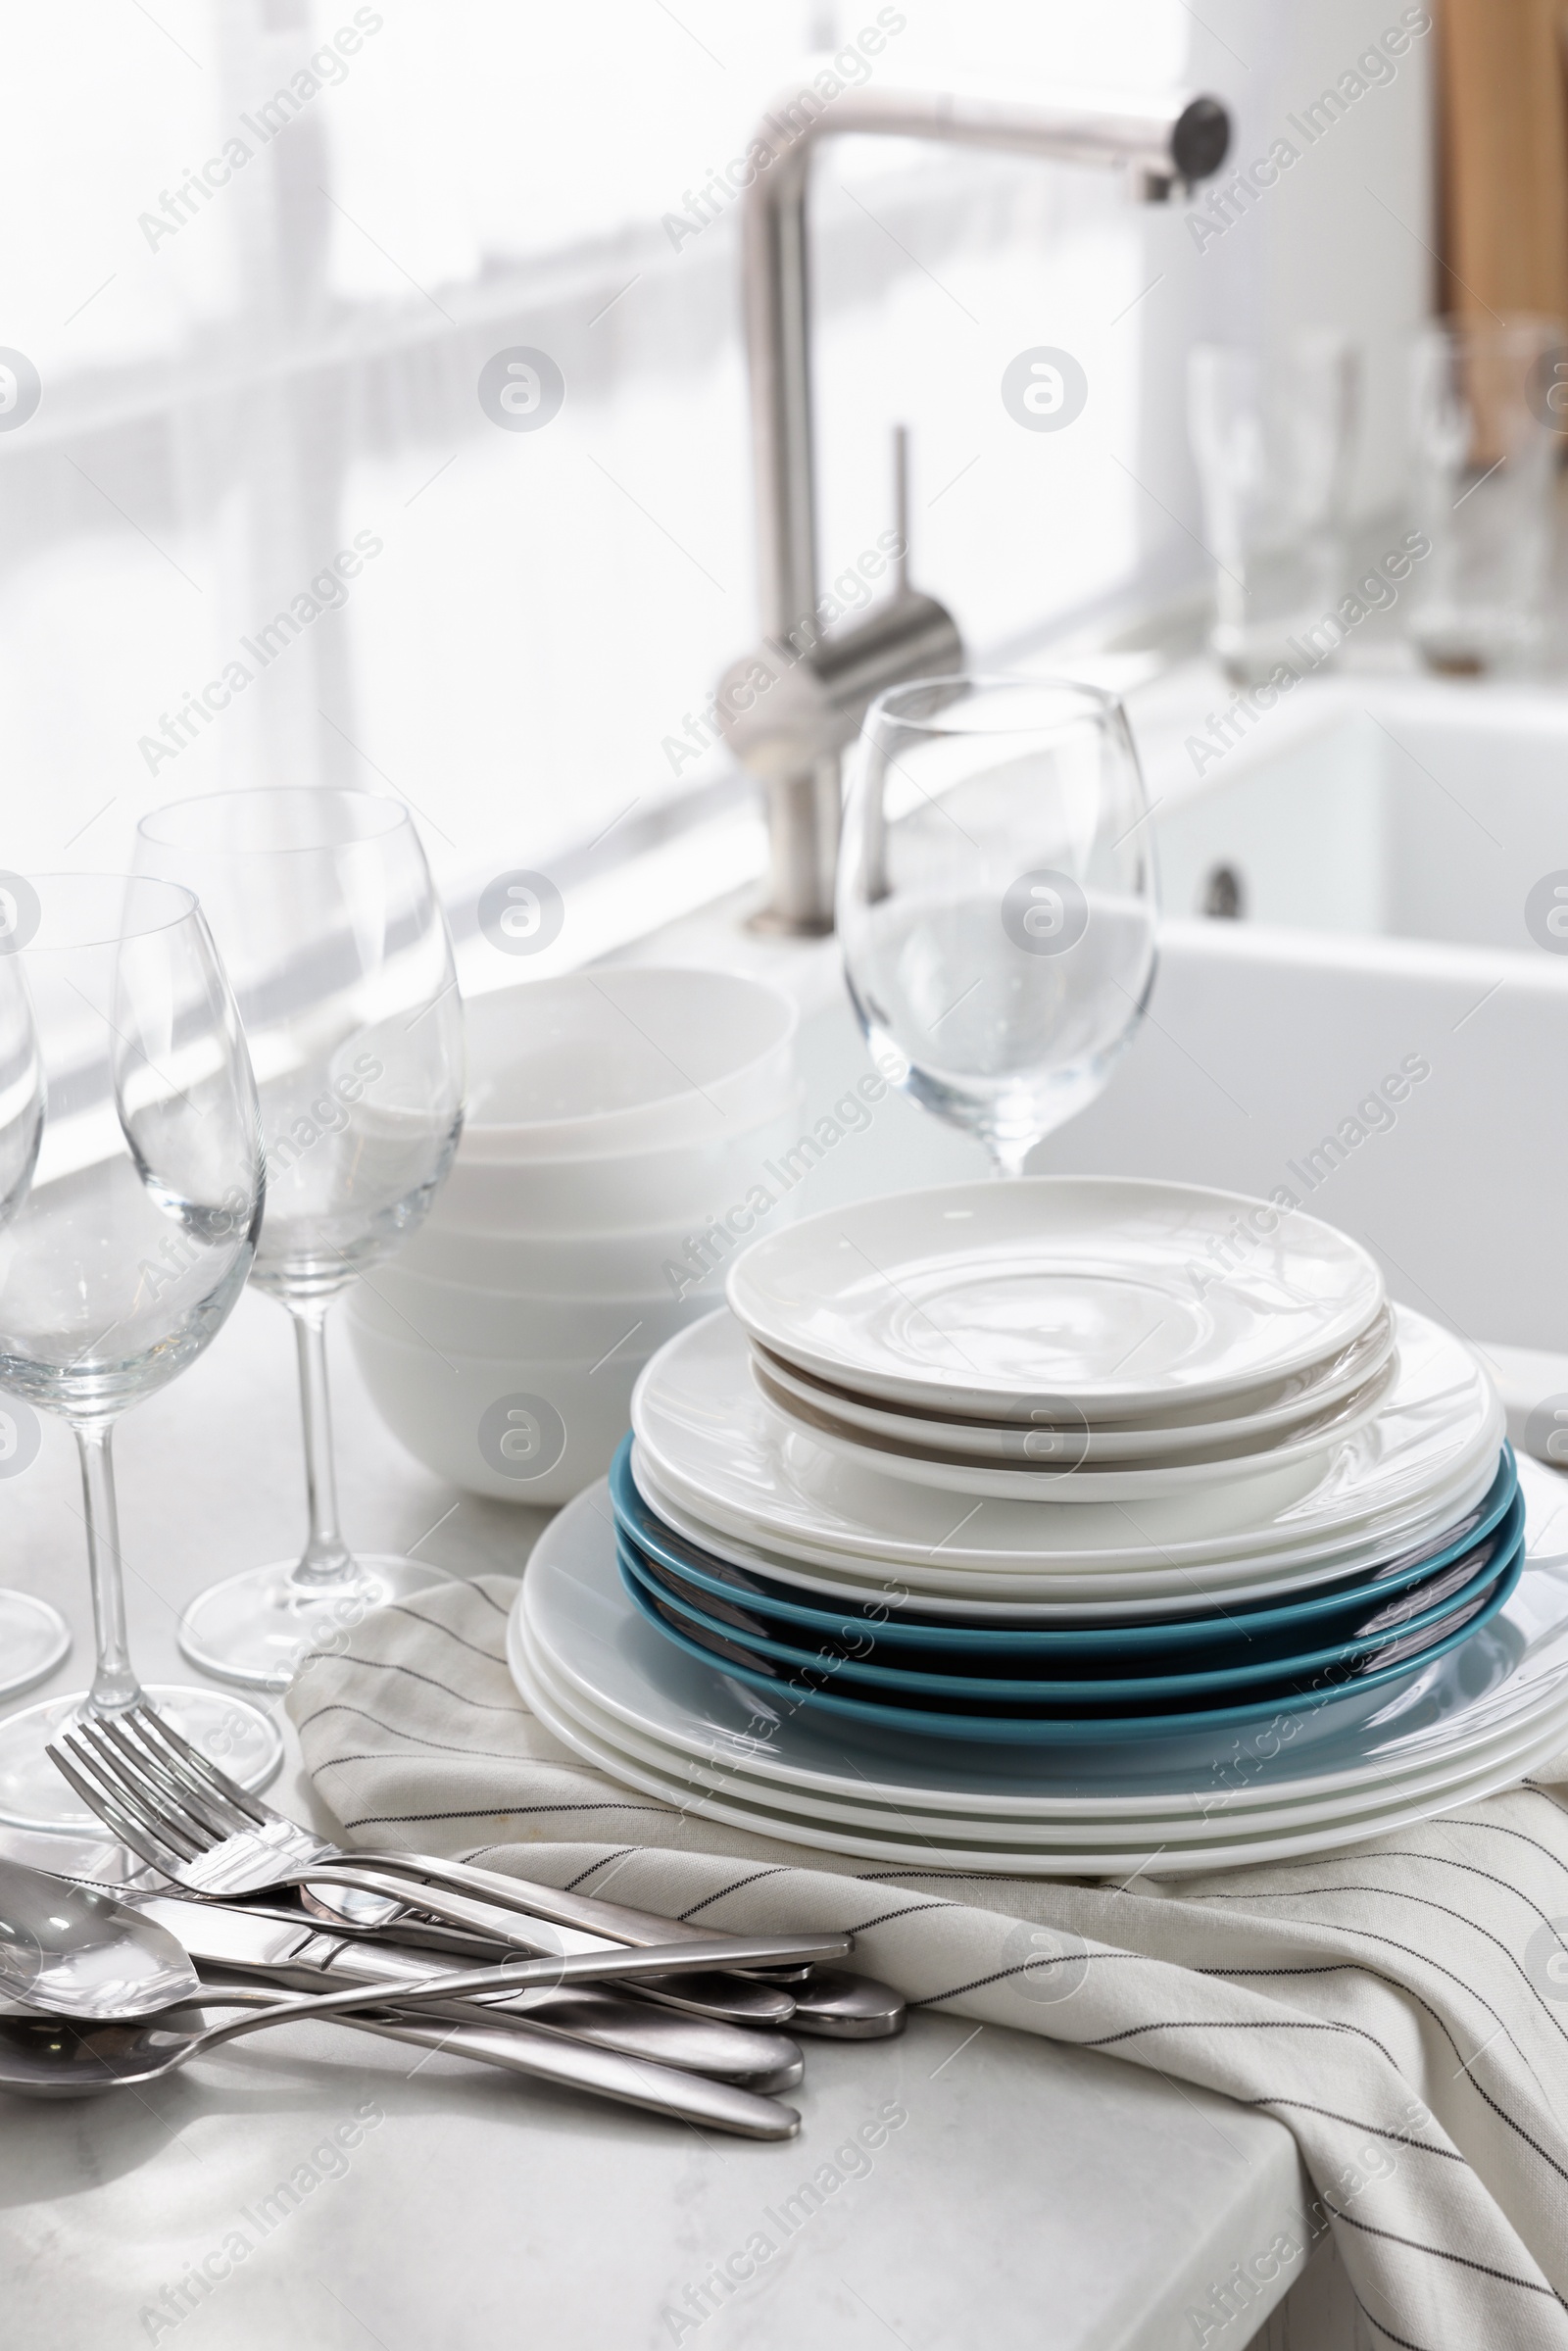 Photo of Different clean dishware, cutlery and glasses on countertop near sink in kitchen